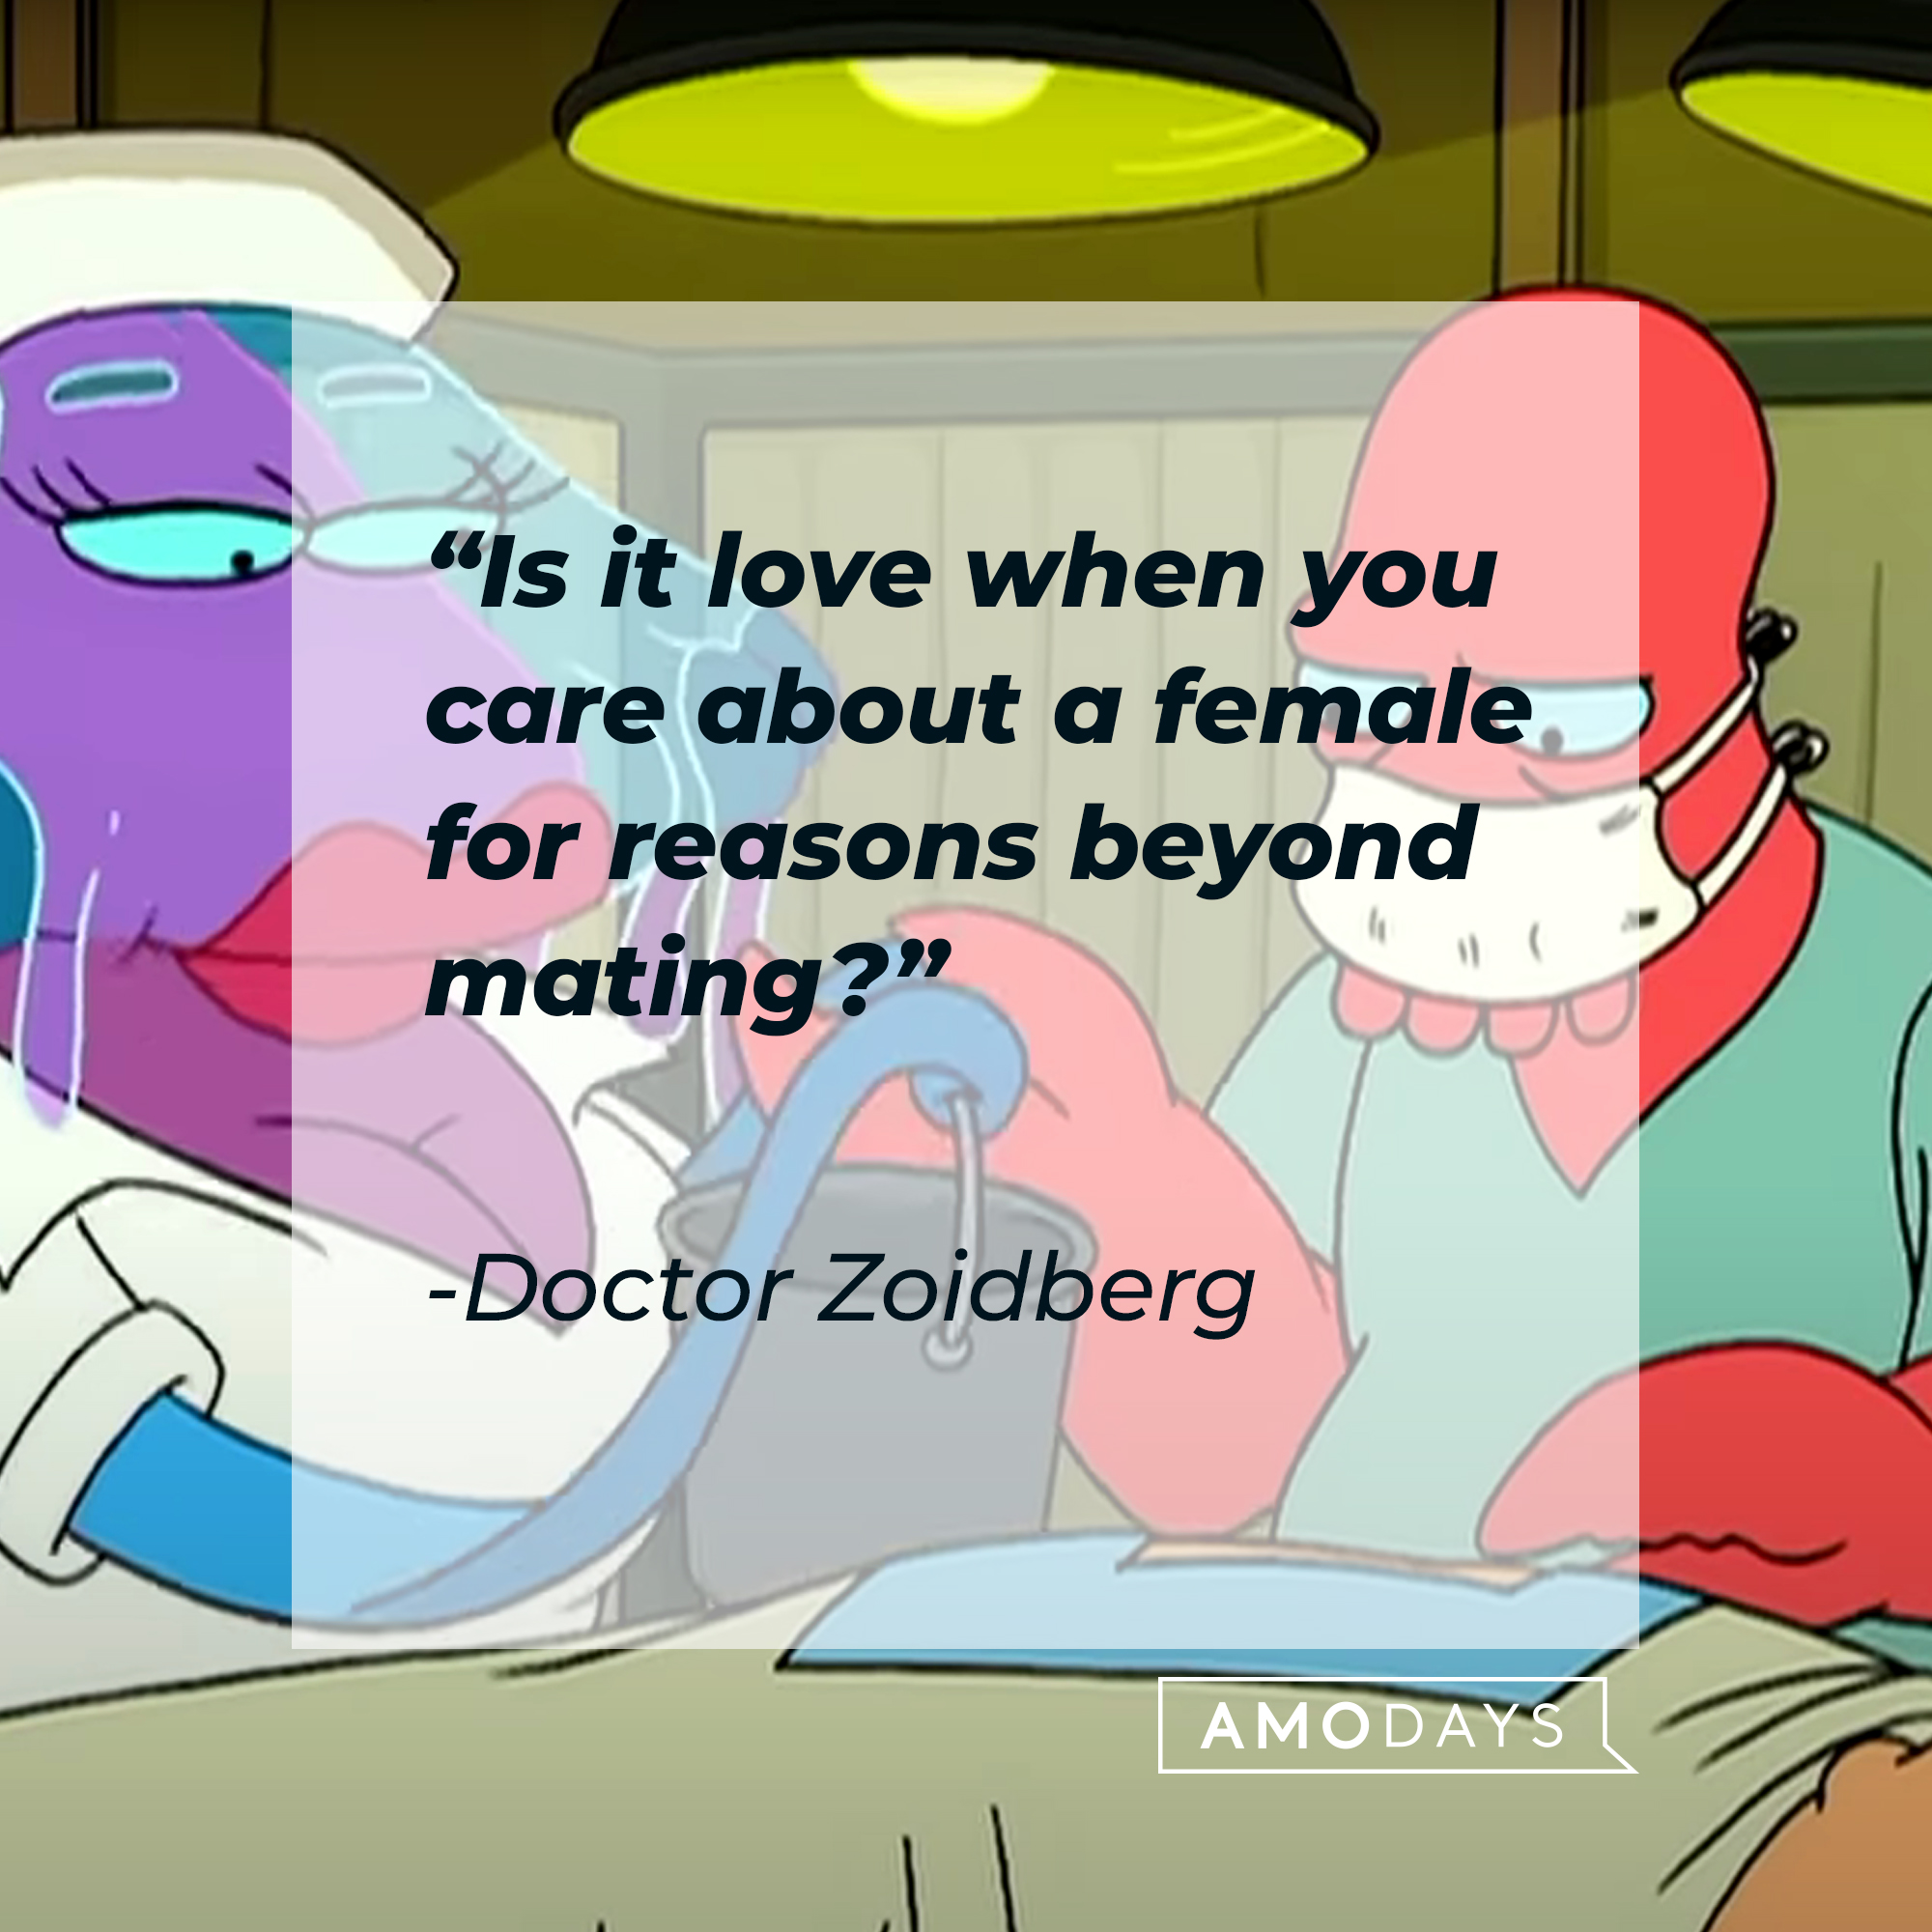 Doctor Zoidberg, with one other character and his quote: “Is it love when you care about a female for reasons beyond mating?” | Source:  facebook.com/Futurama